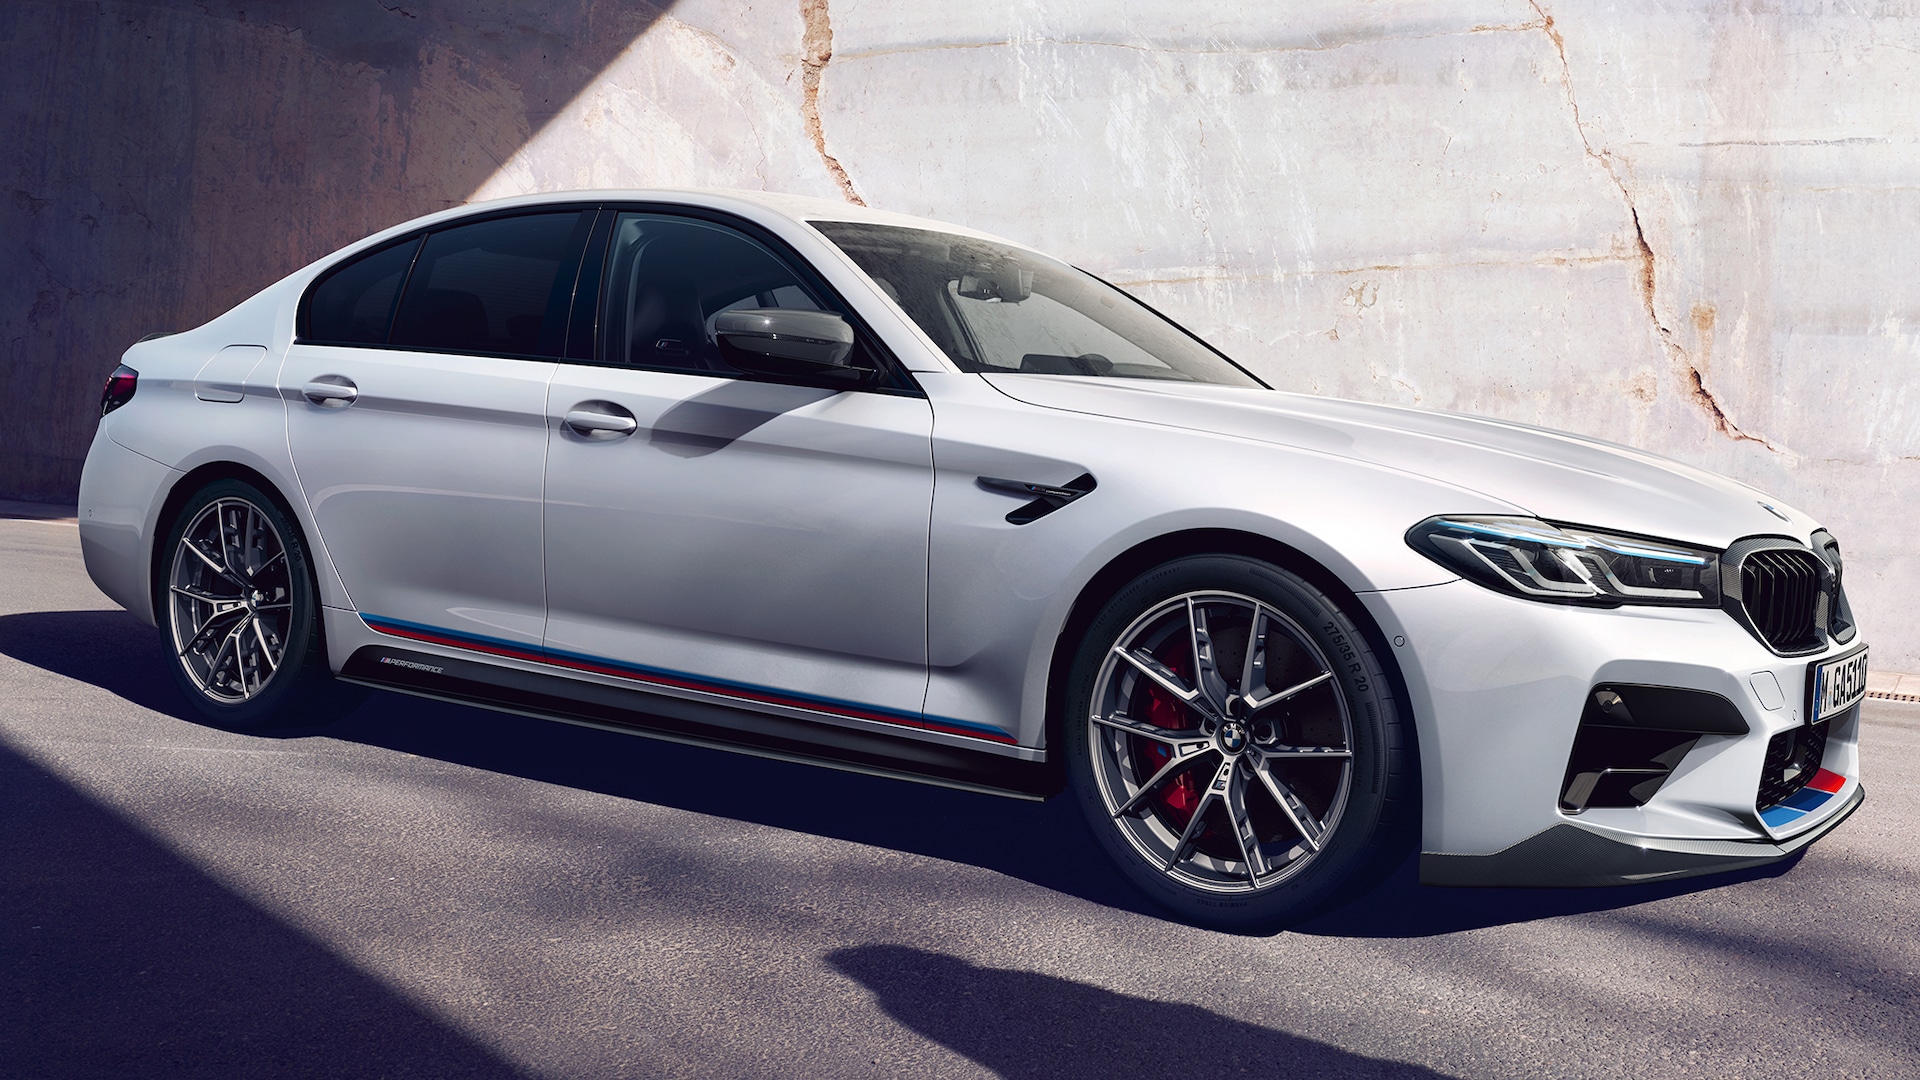 2021 BMW M5 Prices, Reviews, and Photos - MotorTrend